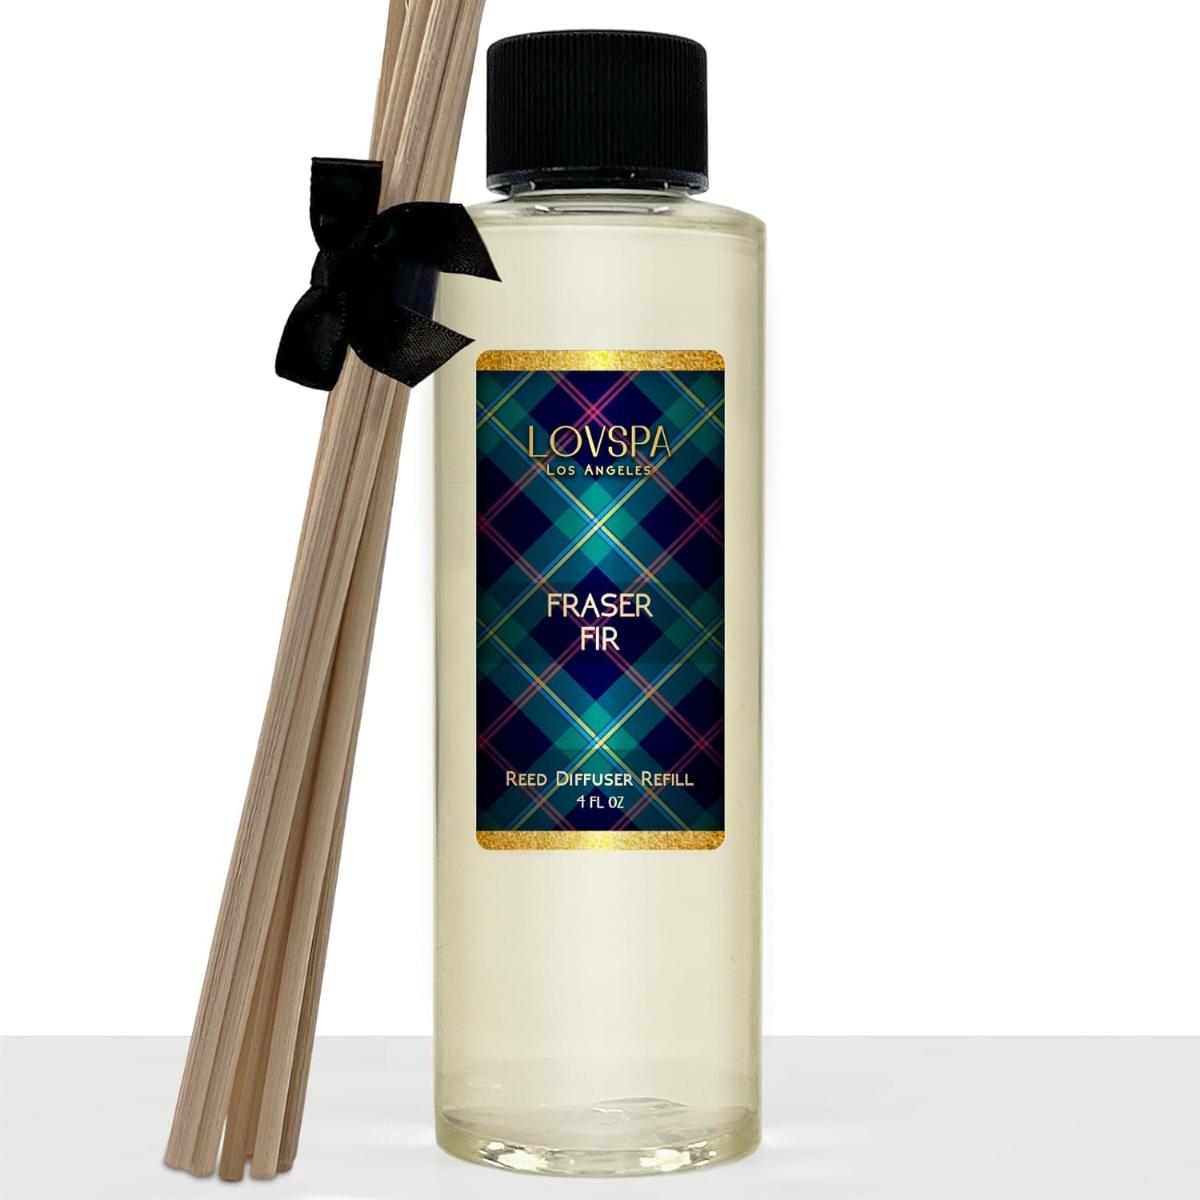 Lovspa Fraser Fir Reed Diffuser Oil Refill With Replacement Scent Sticks